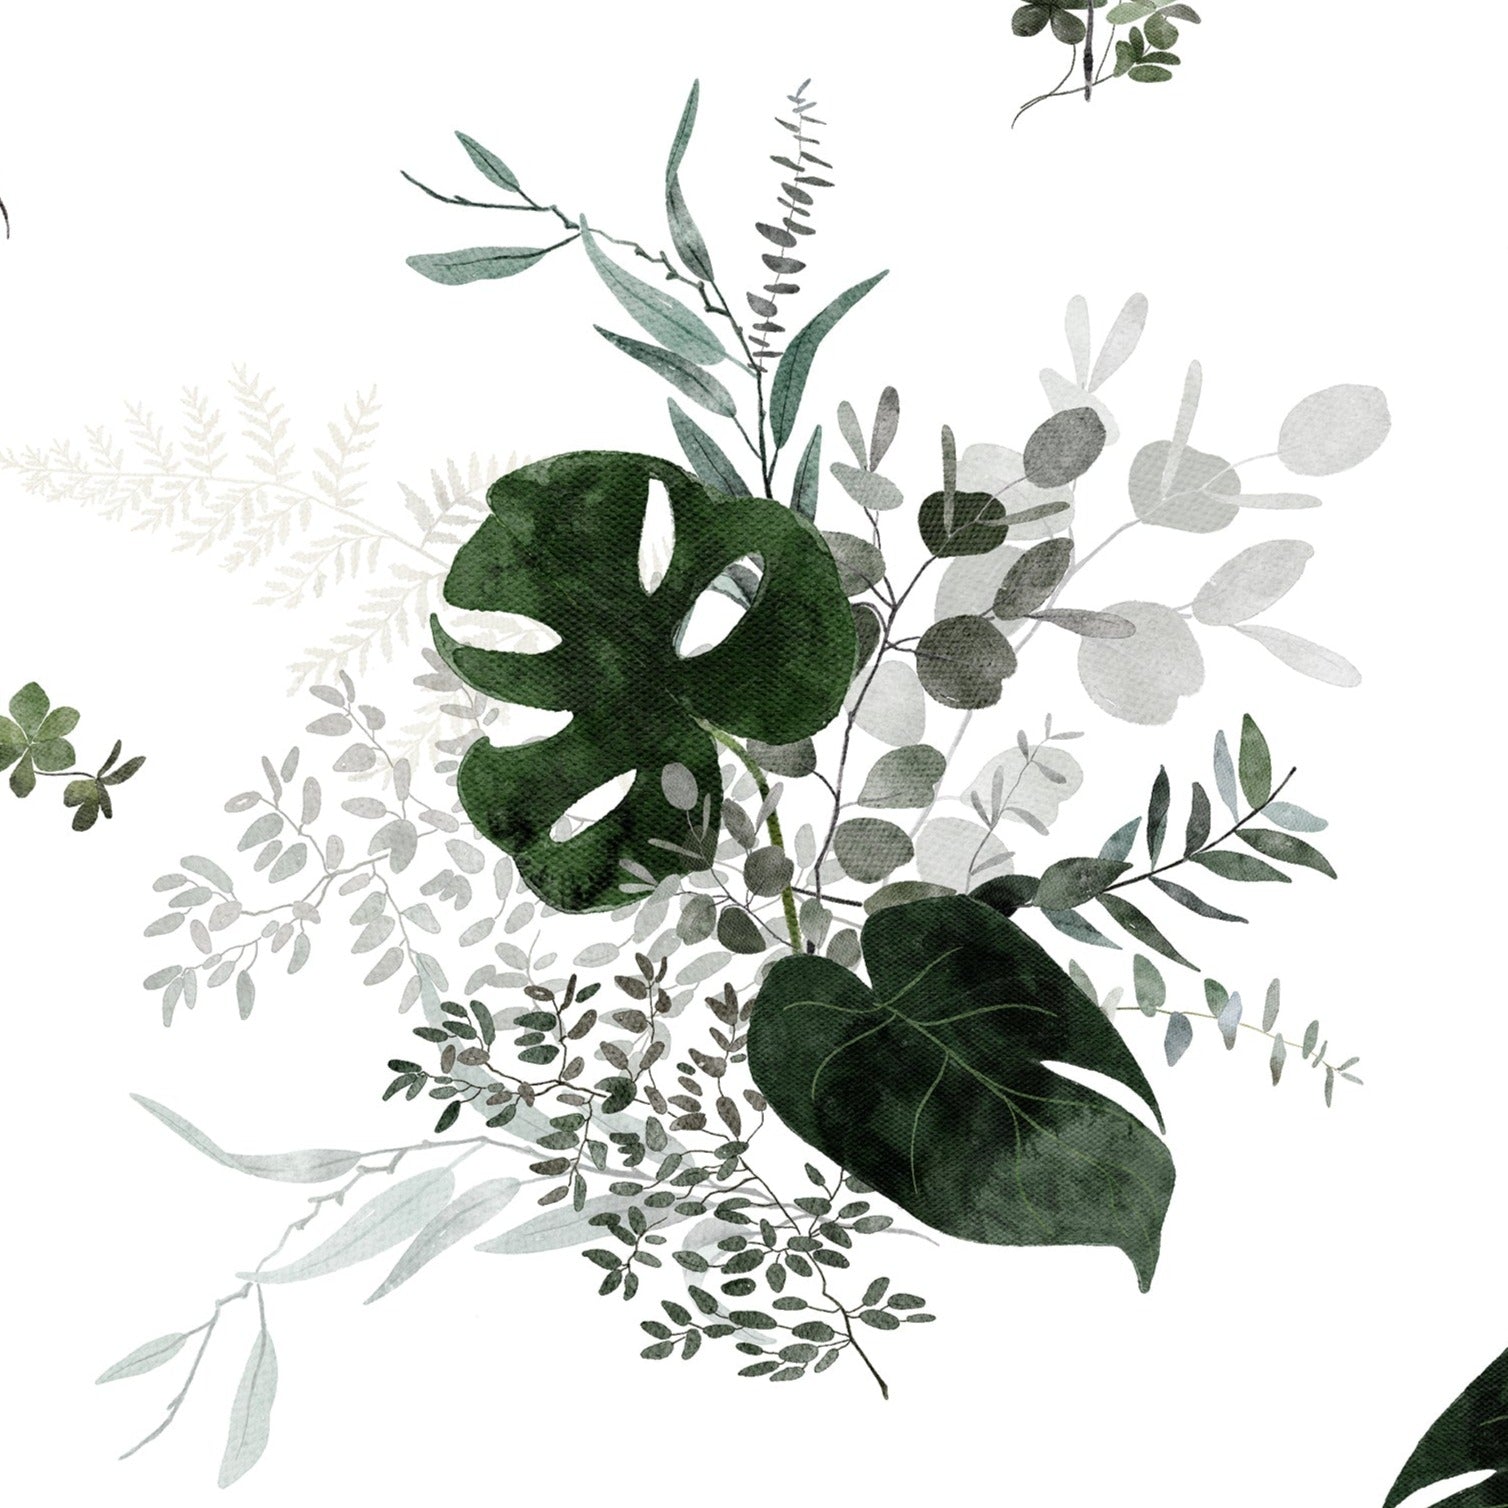 Close-up of the Tropical Greenery Wallpaper, displaying a detailed and artistic array of green botanical elements such as monstera leaves, sprigs, and other foliage in various shades of green, which creates a peaceful and refreshing atmosphere.